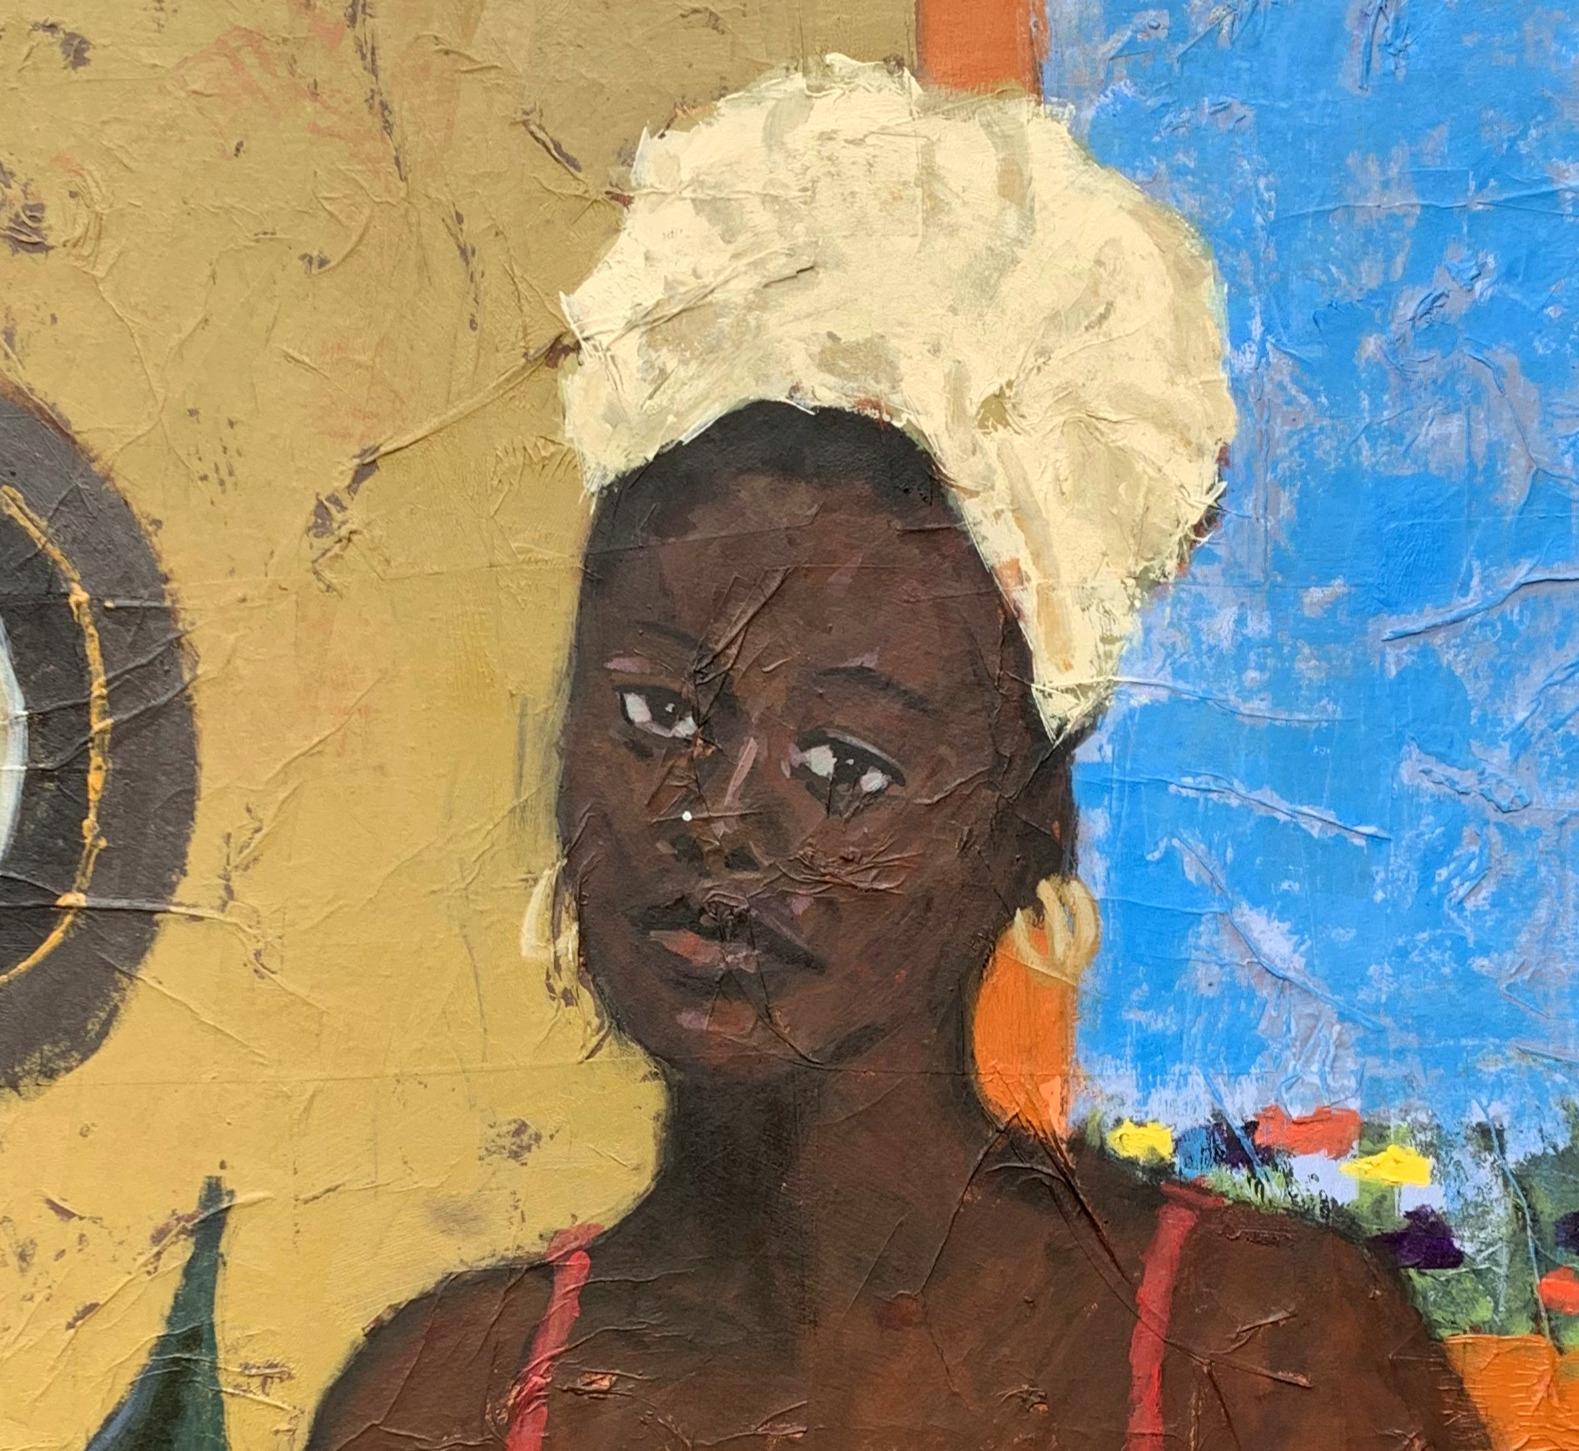 The underlying body of work is an exploration of texturizing distortion as a language of expression. The works explore an awaking of an Afrocentric consciousness connected to gender, power, and the human condition, depicting them on a figurative